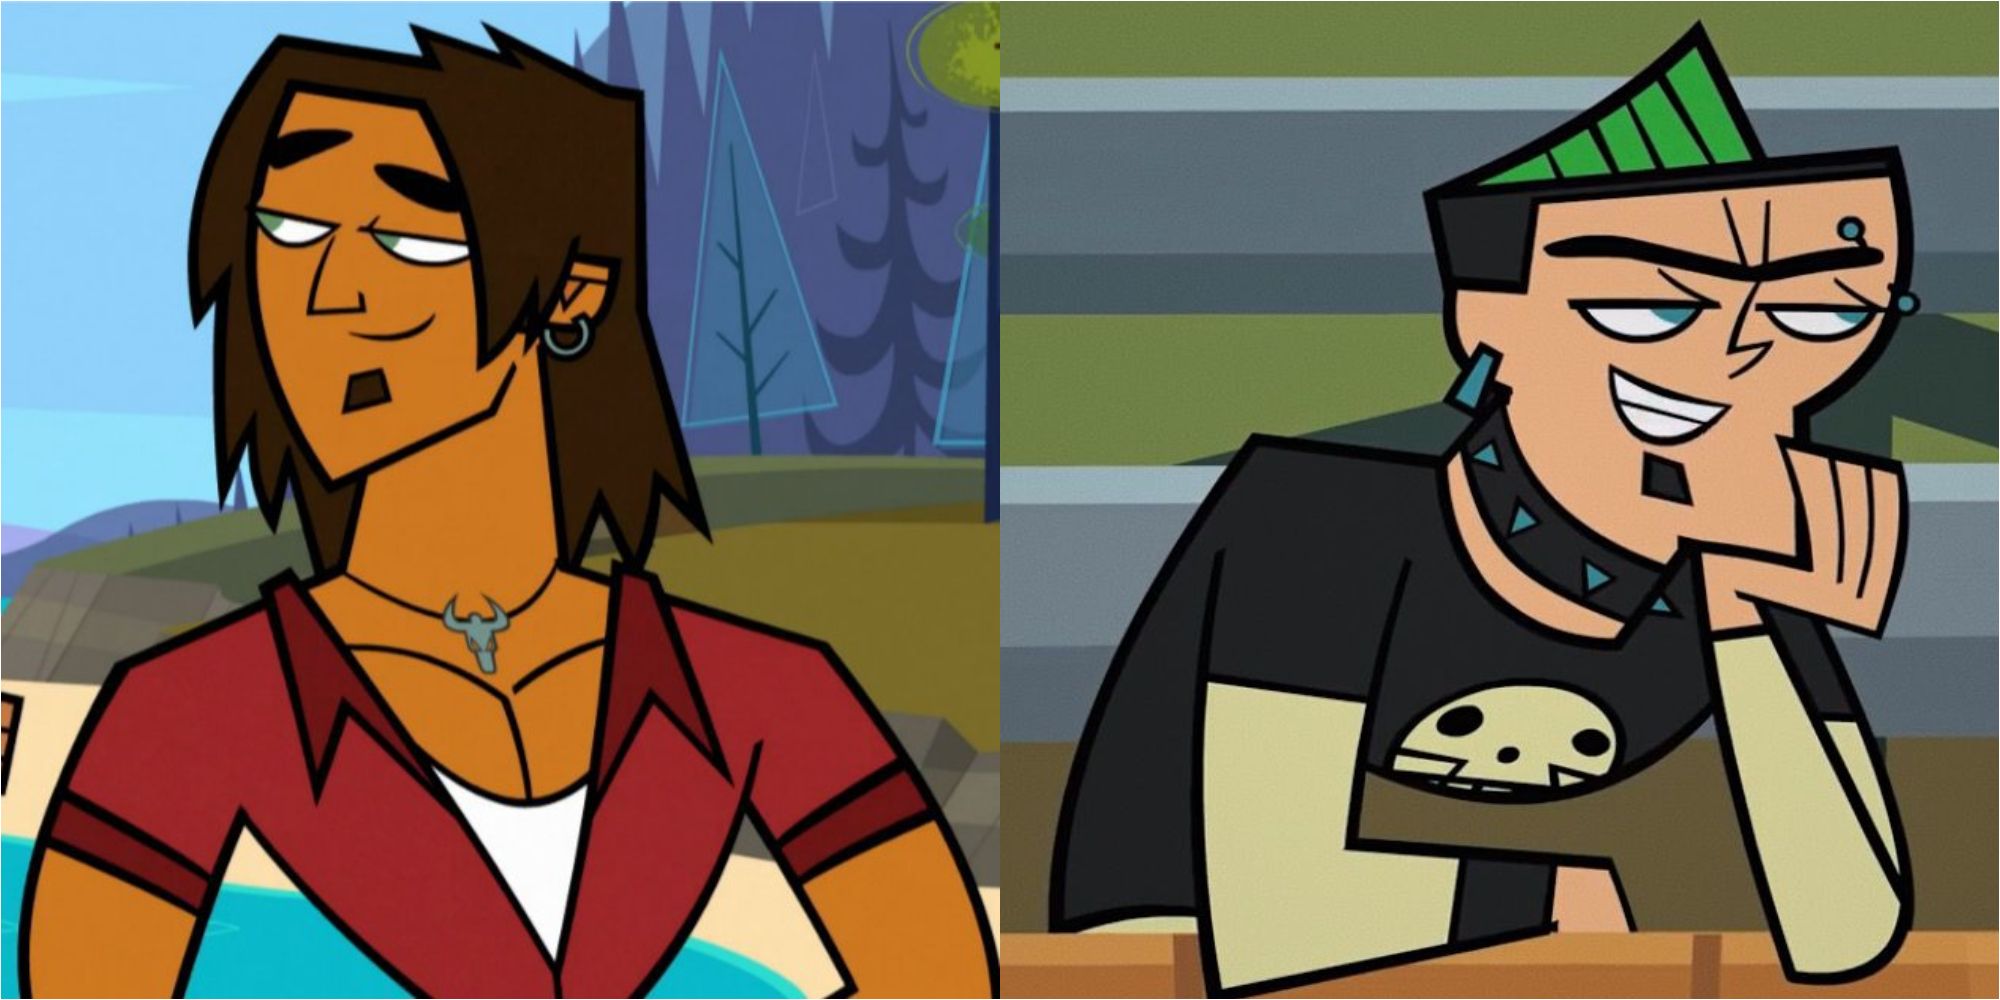 Every Total Drama Character's Favorite Robotboy Character